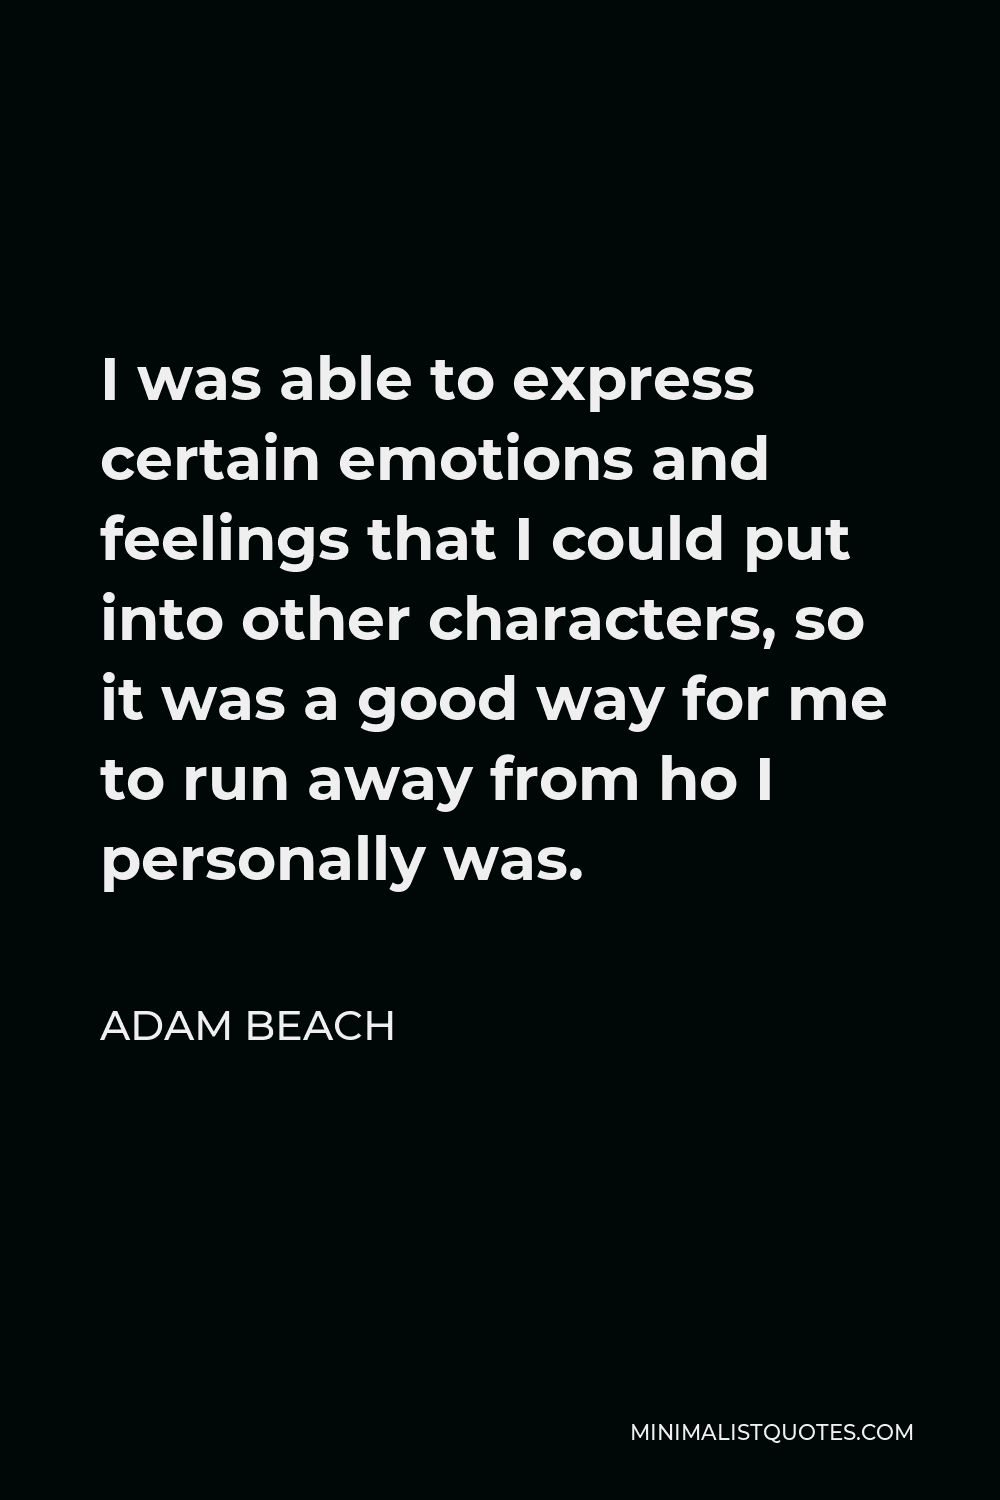 Adam Beach Quote - I was able to express certain emotions and feelings that I could put into other characters, so it was a good way for me to run away from ho I personally was.